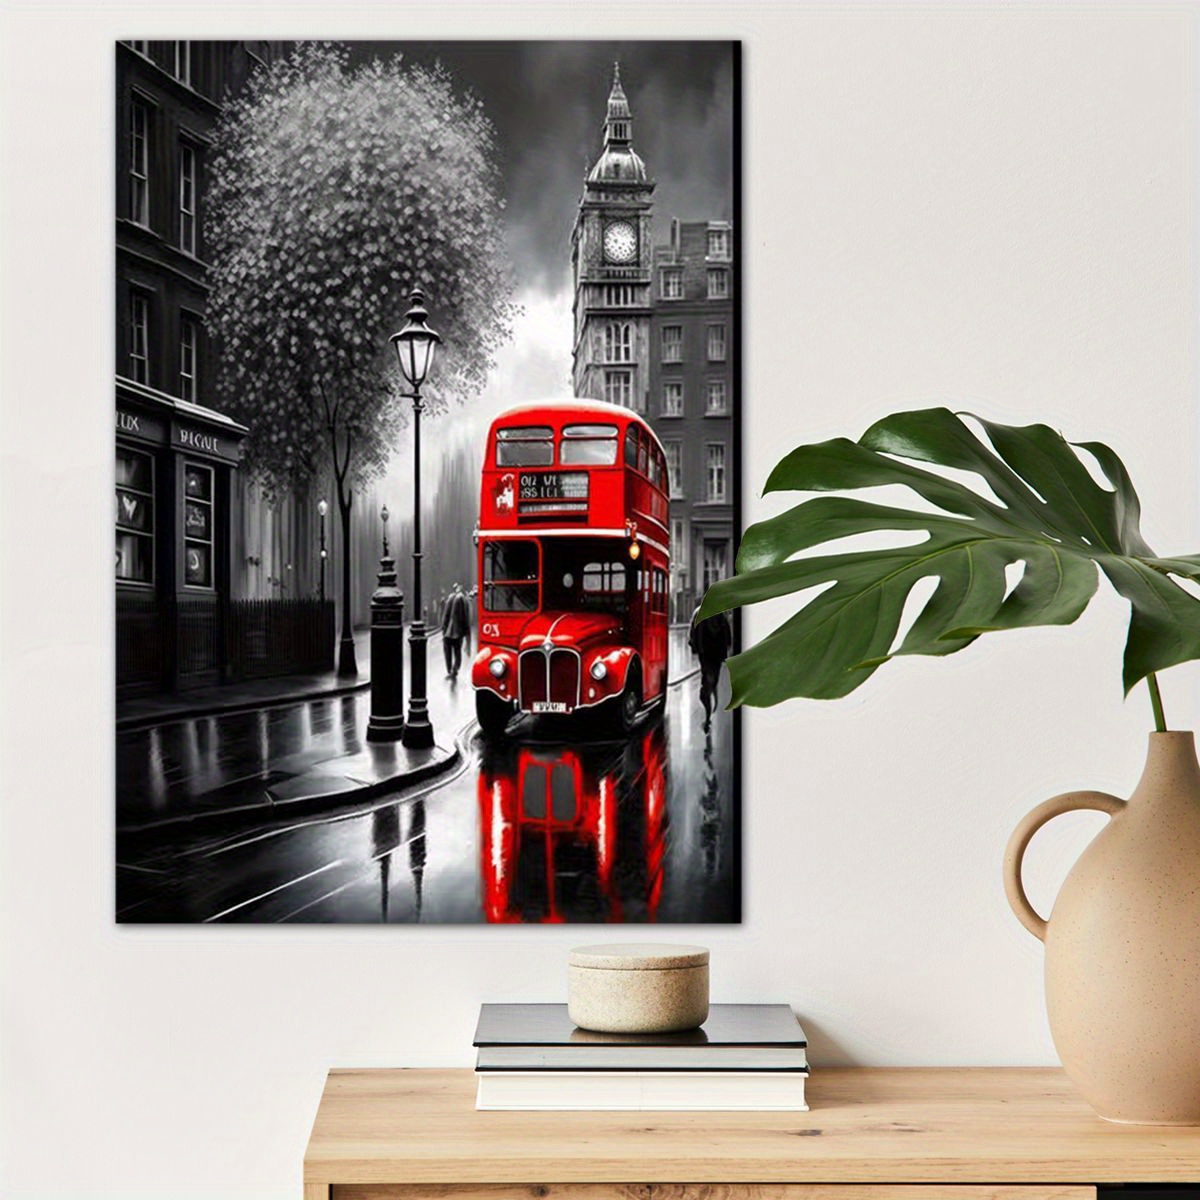 

1pc Street Art London Poster Canvas Wall Art For Home Decor, Lovers Poster Wall Decor High Quality Canvas Prints For Living Room Bedroom Kitchen Office Cafe Decor, Perfect Gift And Decoration